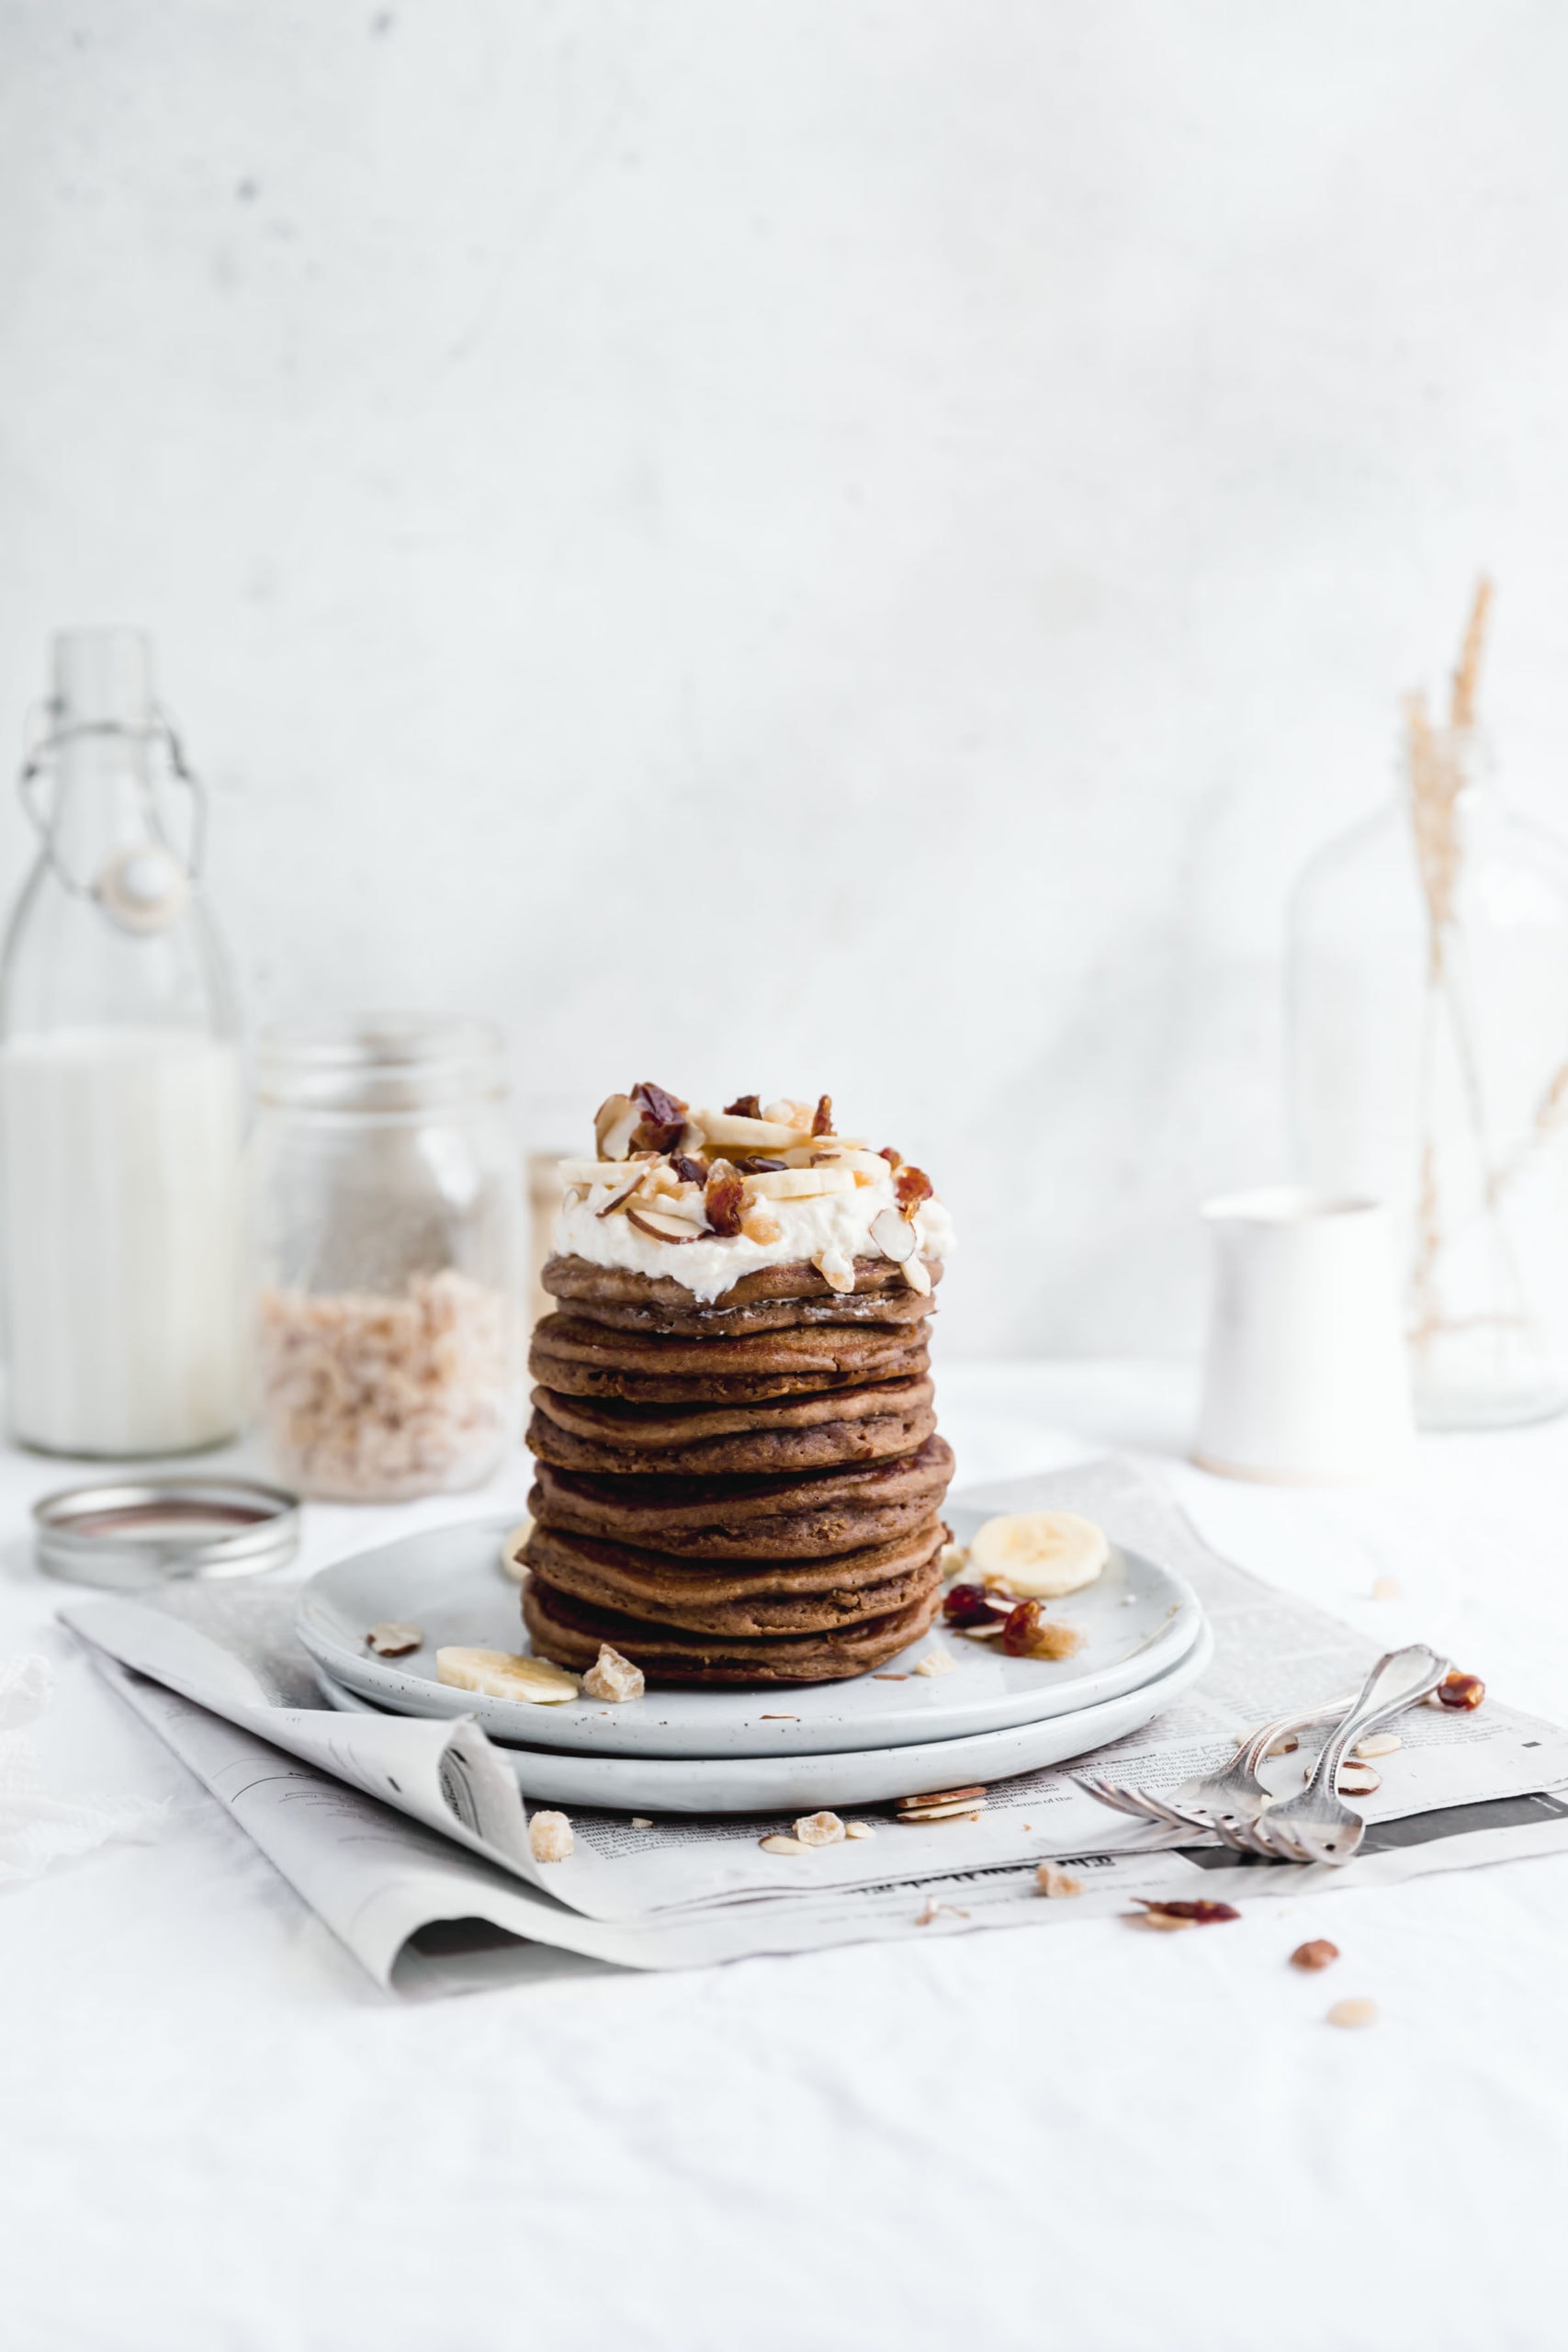 Start your Christmas morning off right with a fat stack of these fluffy gingerbread pancakes. Topped with a healthy pour of maple syrup, these pancakes are perfect for the holidays!